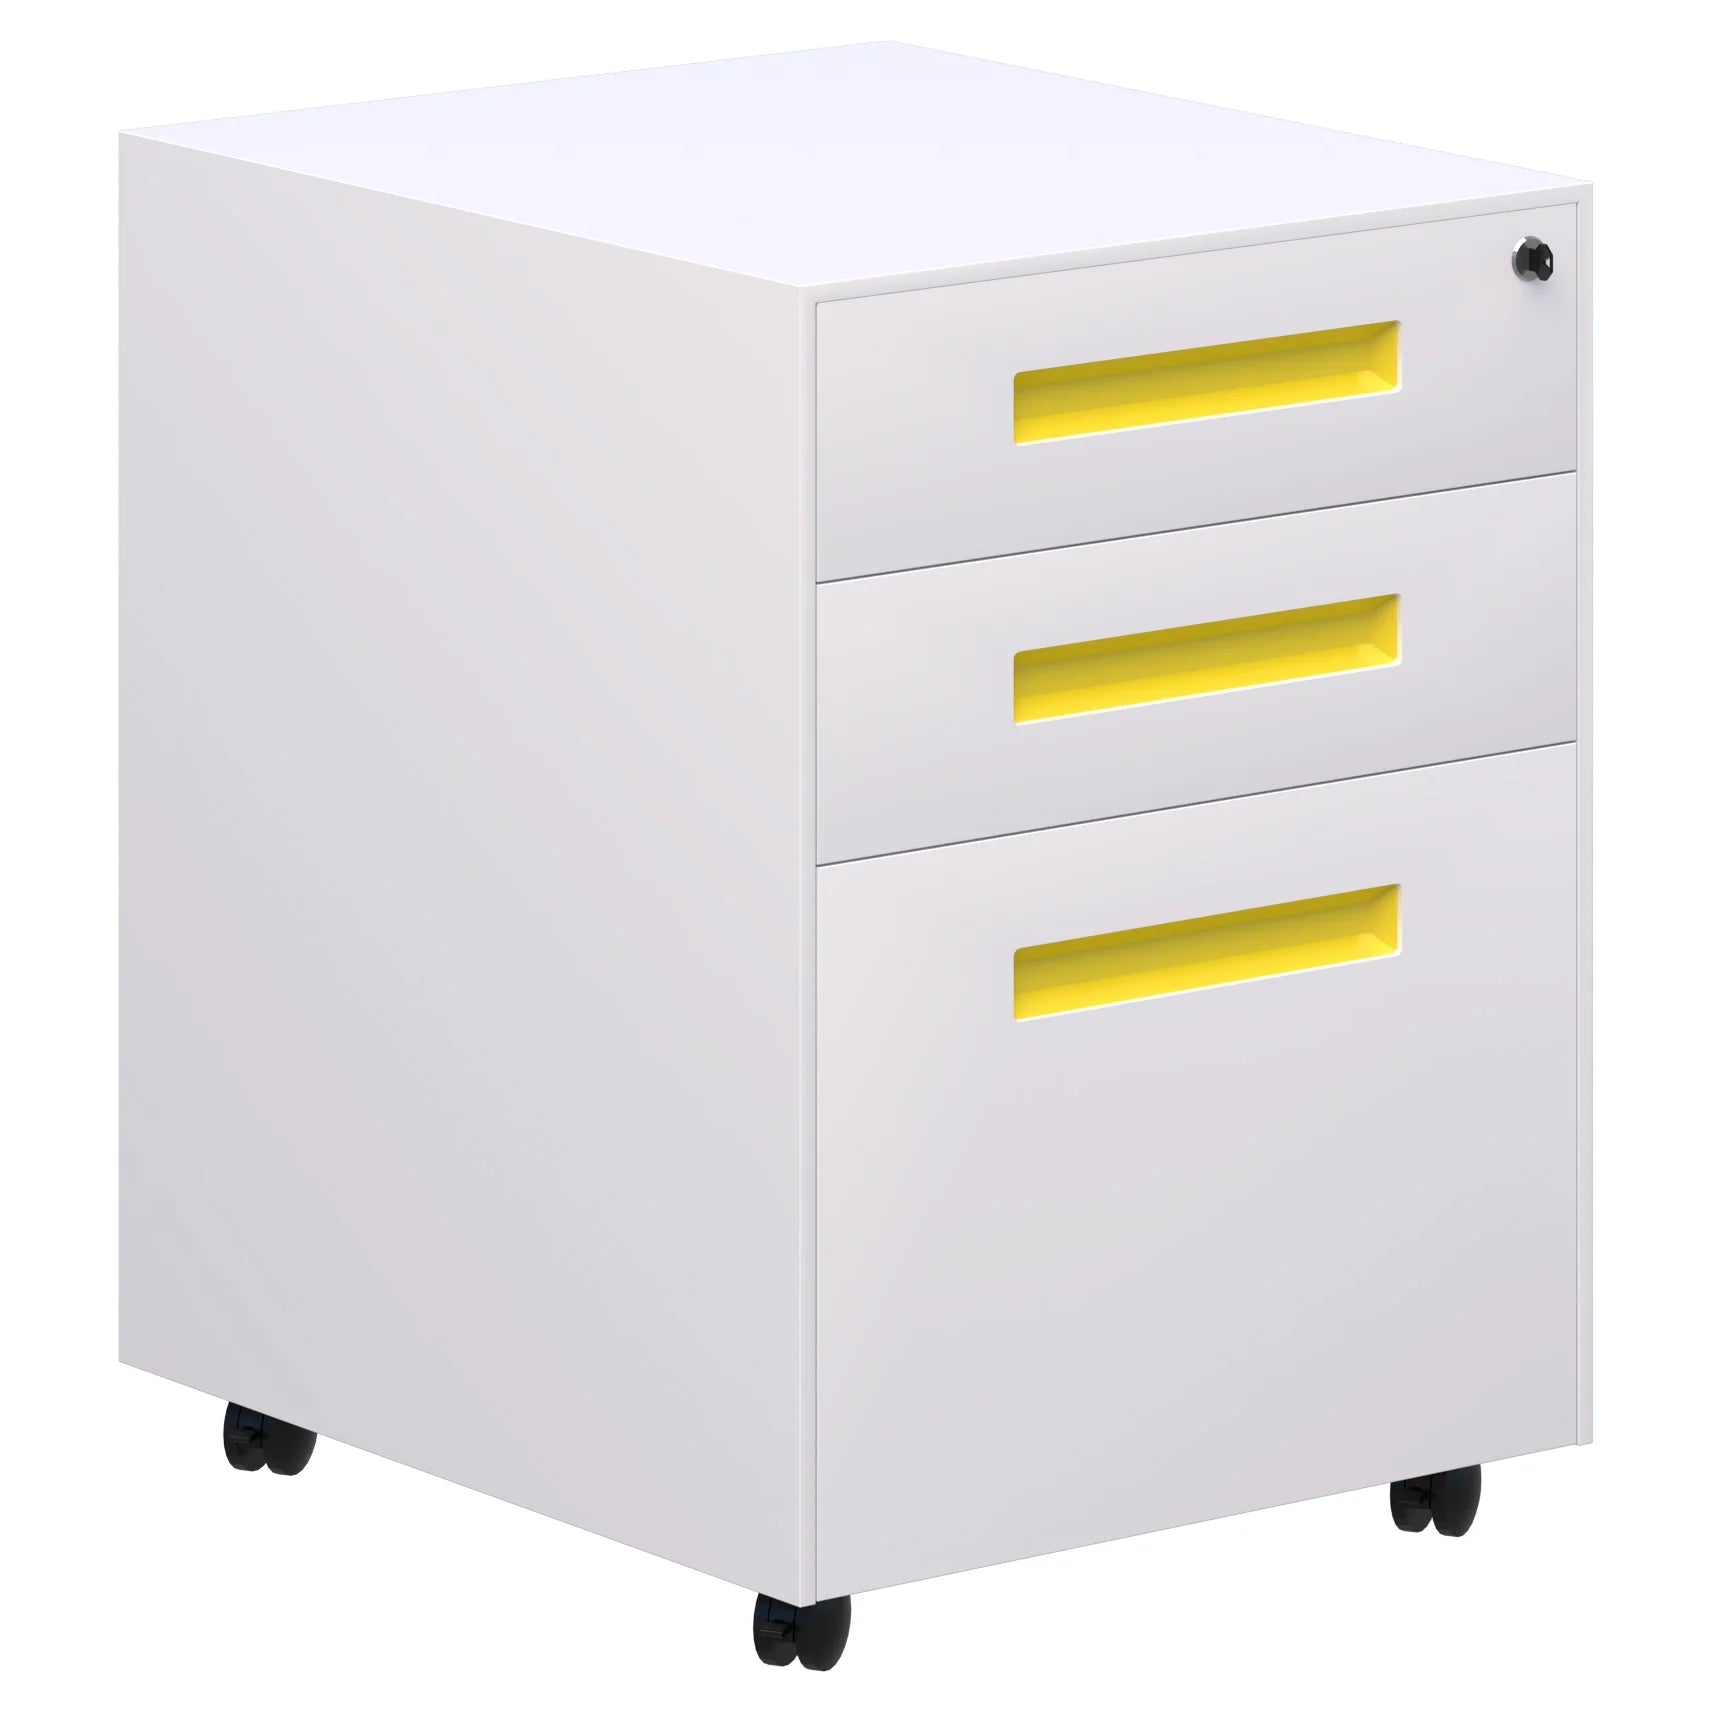 Lockable Spectrum metal mobile with two stationery drawers and 1 file draw in white with yellow handles.